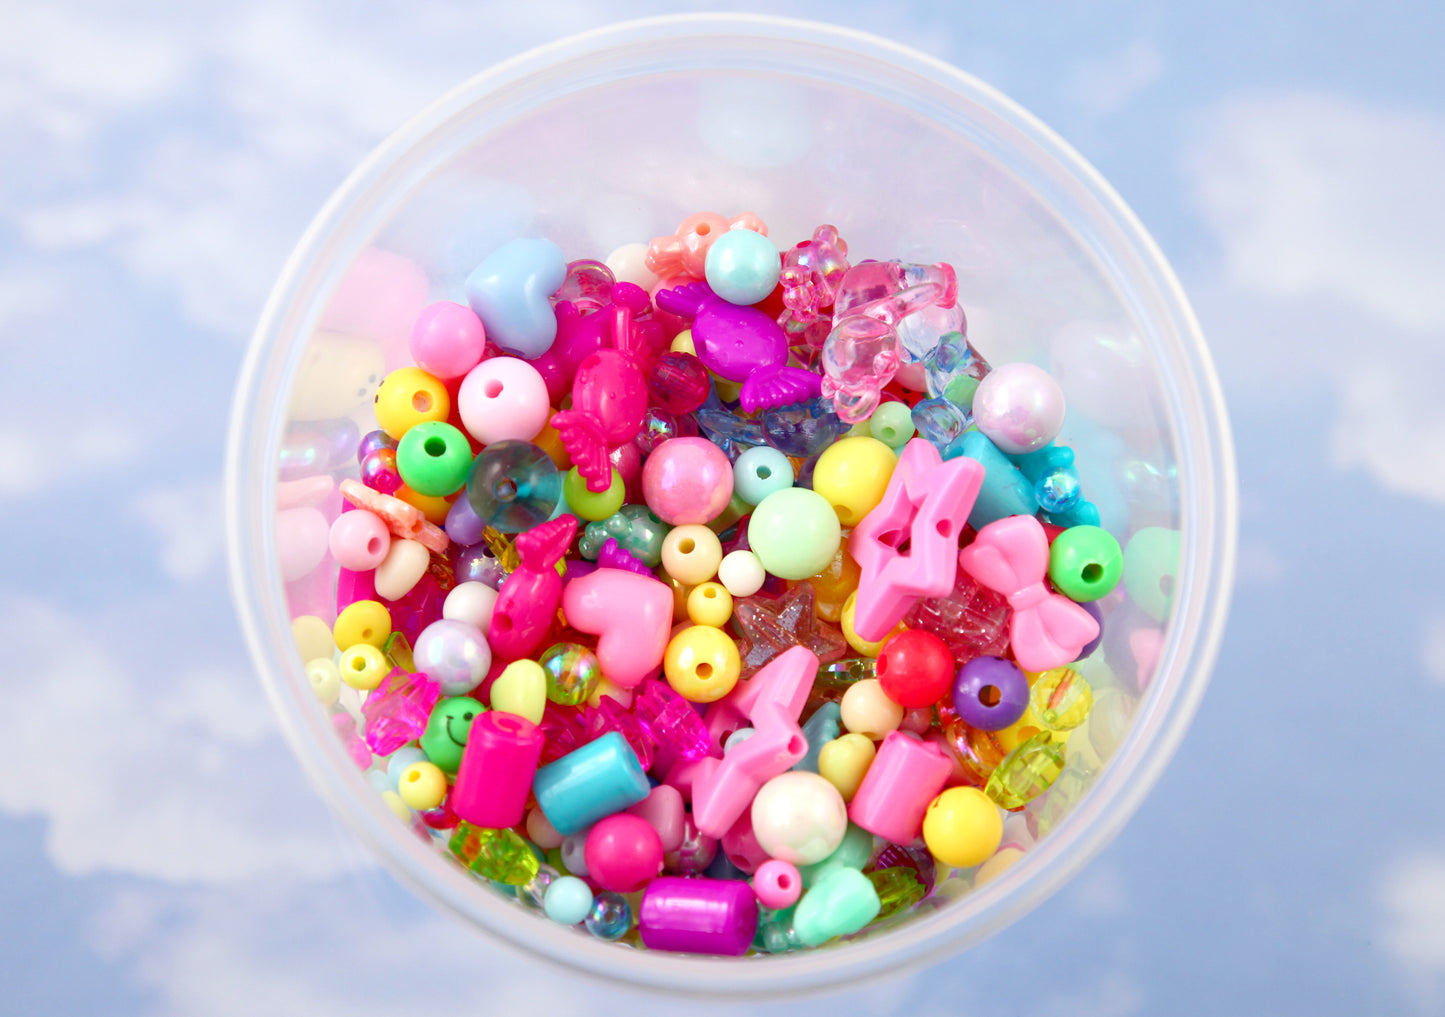 Acrylic Bead Grab Bag - Cute Mixed Lot of Plastic Beads - great for kandi, ispy, sensory crafts, jewelry making - Over 200 pcs